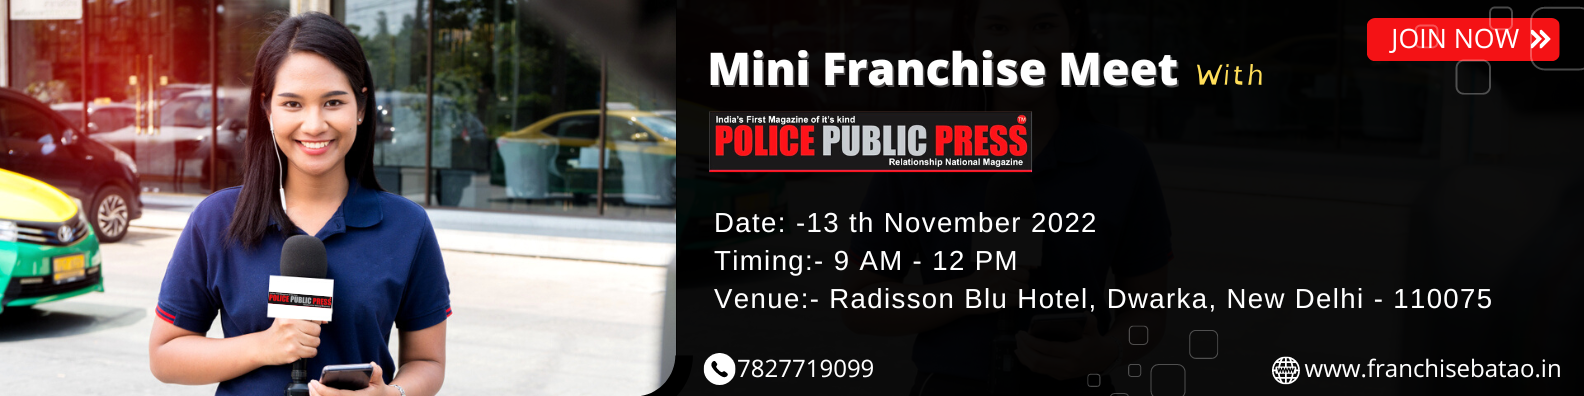 mini franchise meet with police public press